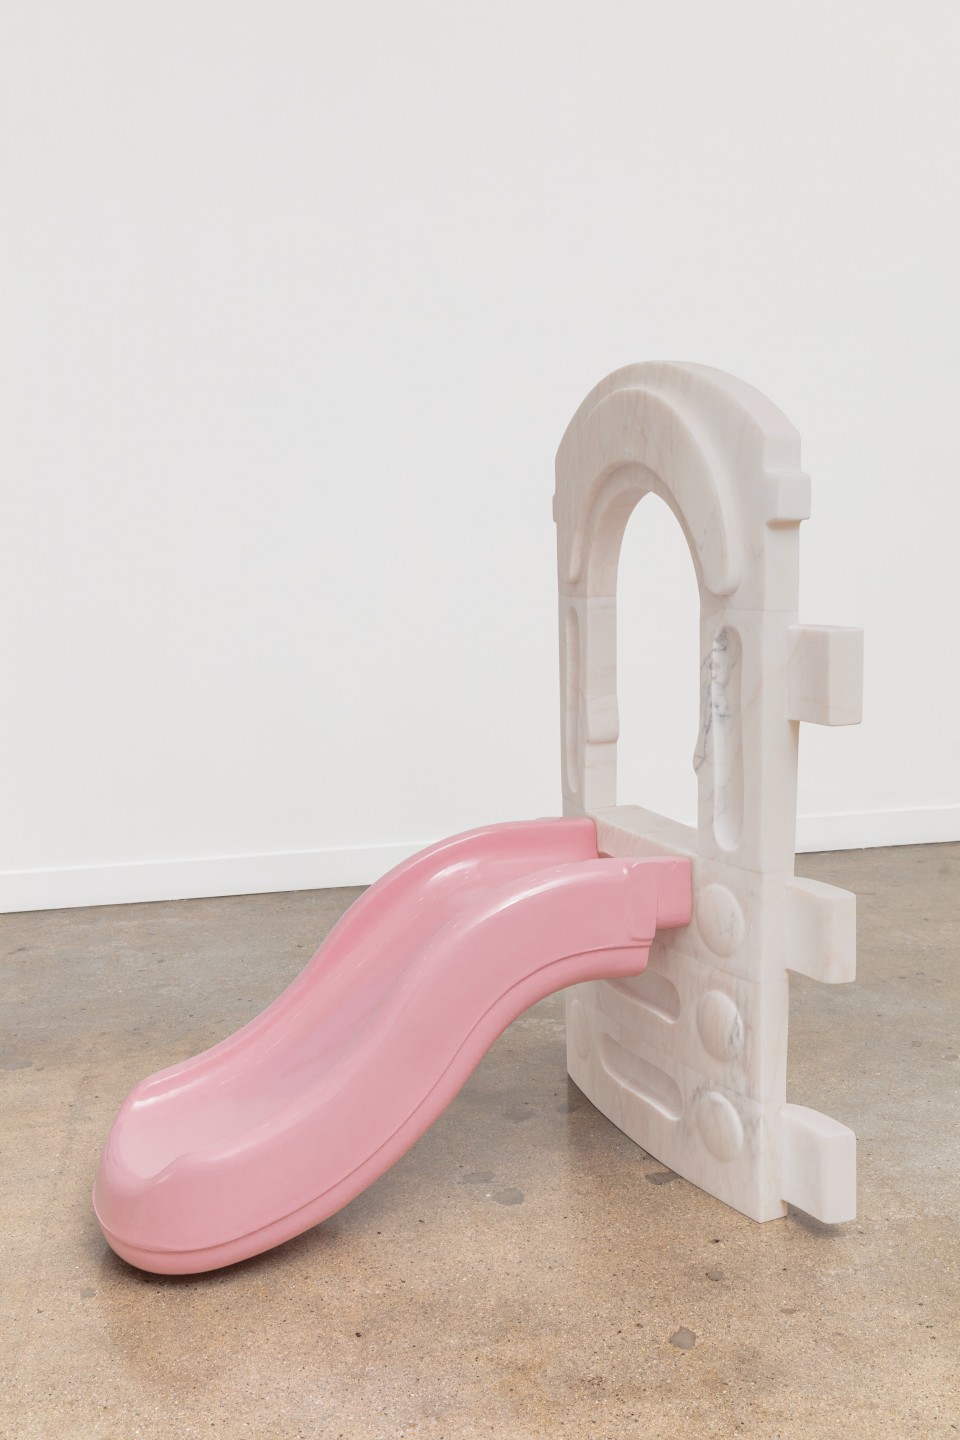 Image: Nevine Mahmoud  Child's play (frame), 2021  Portugese pink marble, plastic and autobody paint  54 x 30 x 44 inches (137.2 x 76.2 x 111.8 cm)